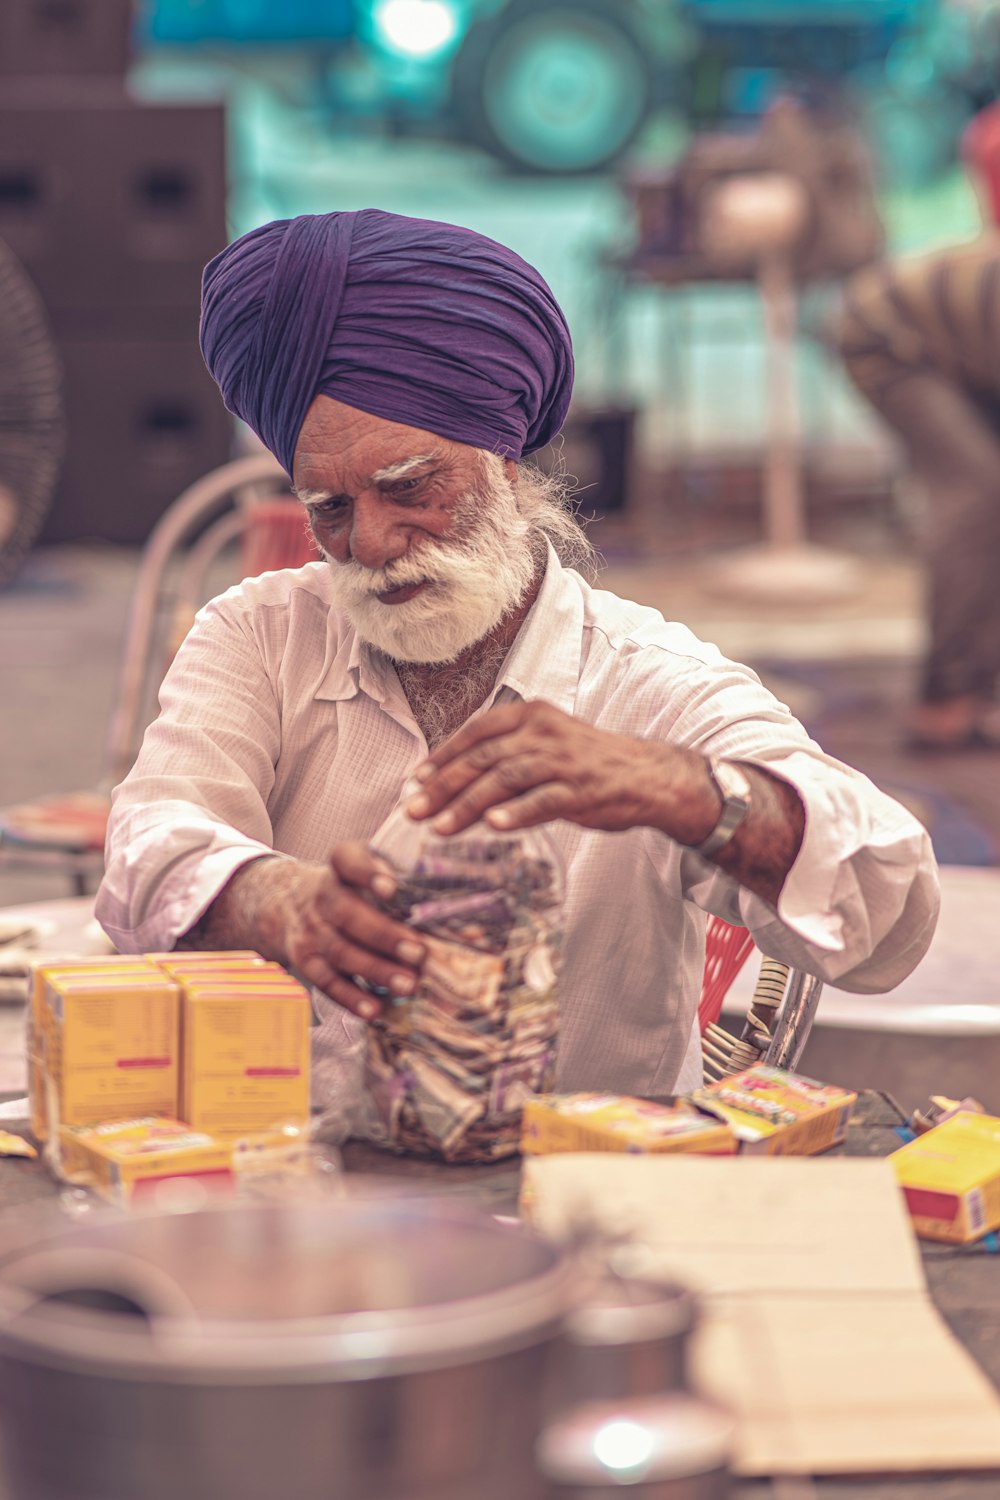 a man in a turban is putting food in a container